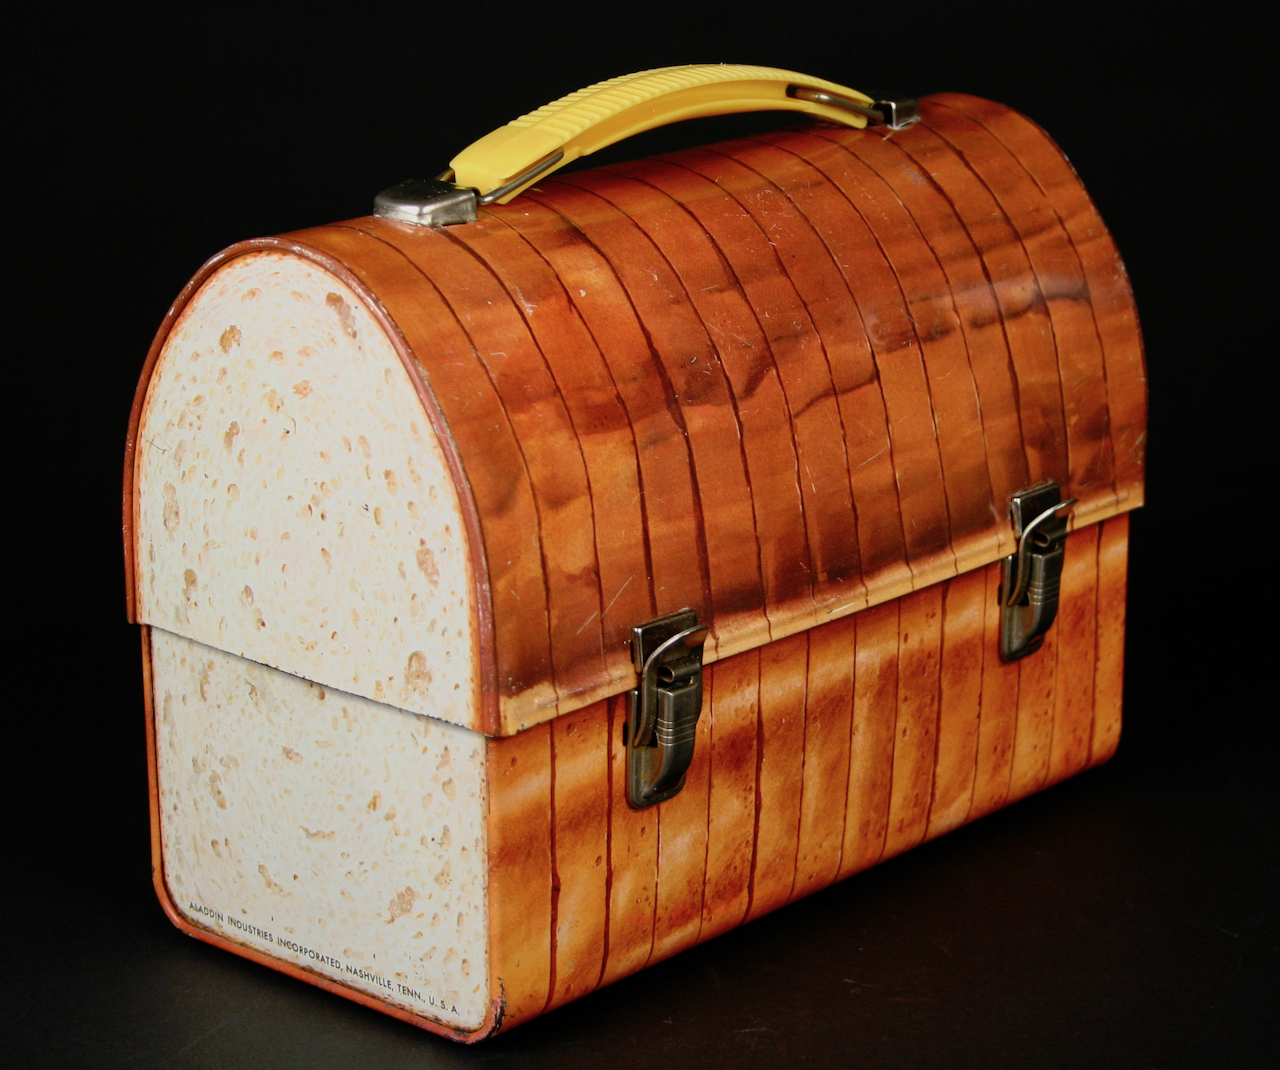 http://dinnerwaremuseum.org/main/wp-content/uploads/loaf-of-sliced-bread-metal-lunch-box-1960s-2020.16.jpeg